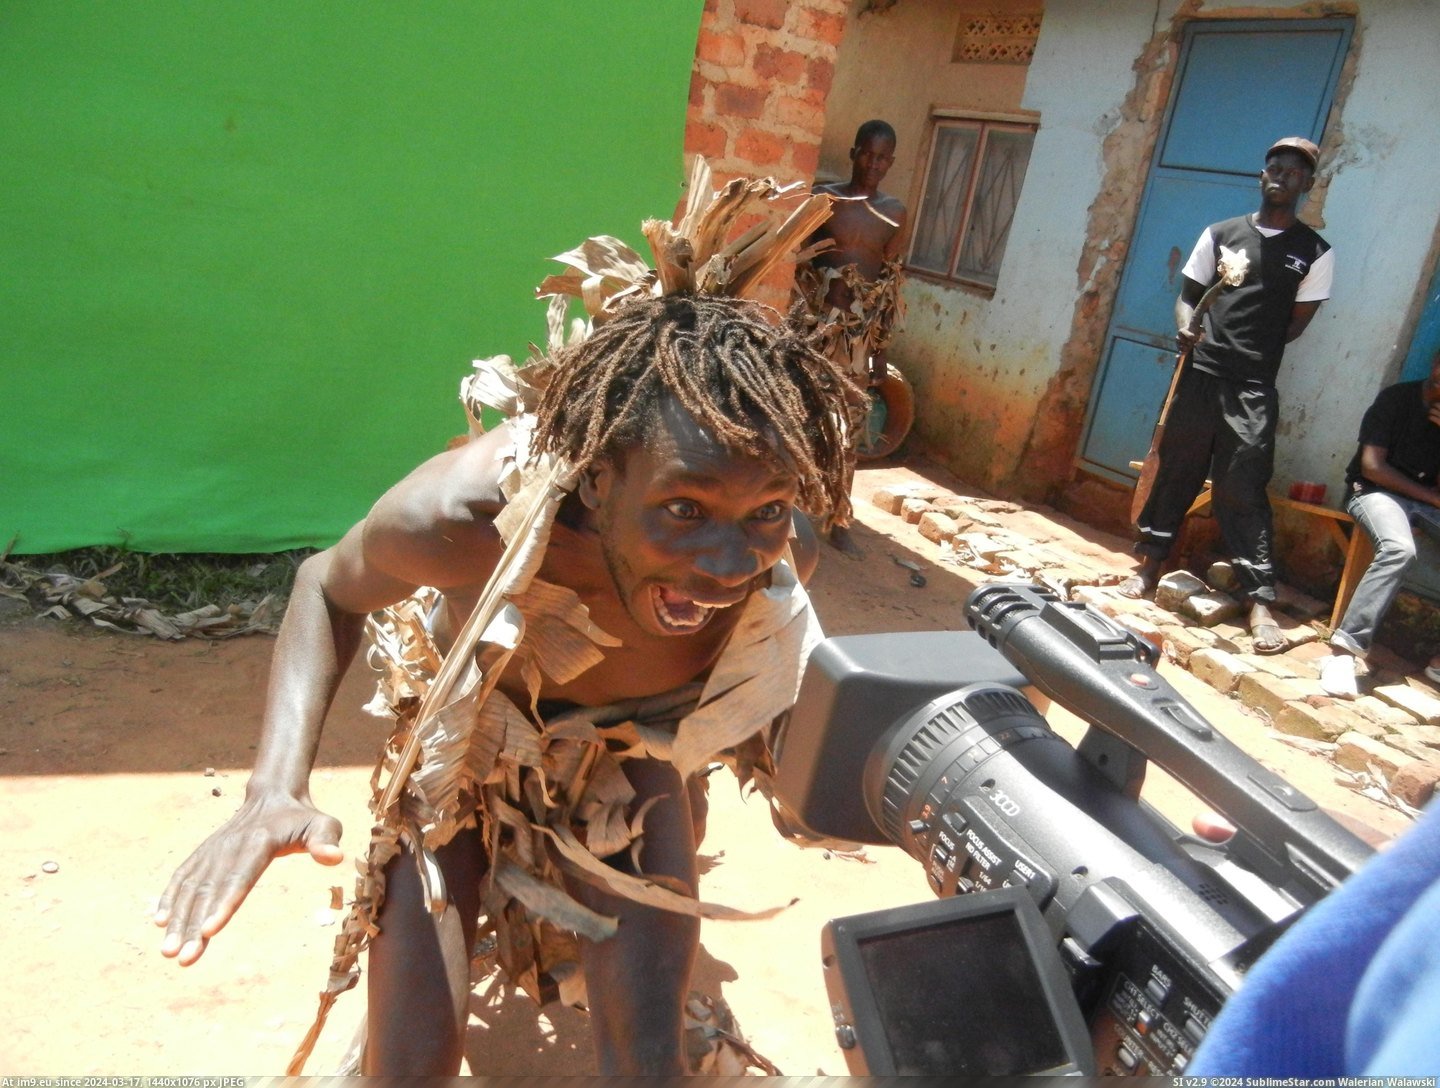 #Months #Living #Spent #Films #Slum #Wakaliwood #Africa #Nyc #Action [Pics] I'm from NYC and spent about 8 months living in a slum in Africa that makes action films (Wakaliwood). Somehow became a U Pic. (Bild von album My r/PICS favs))